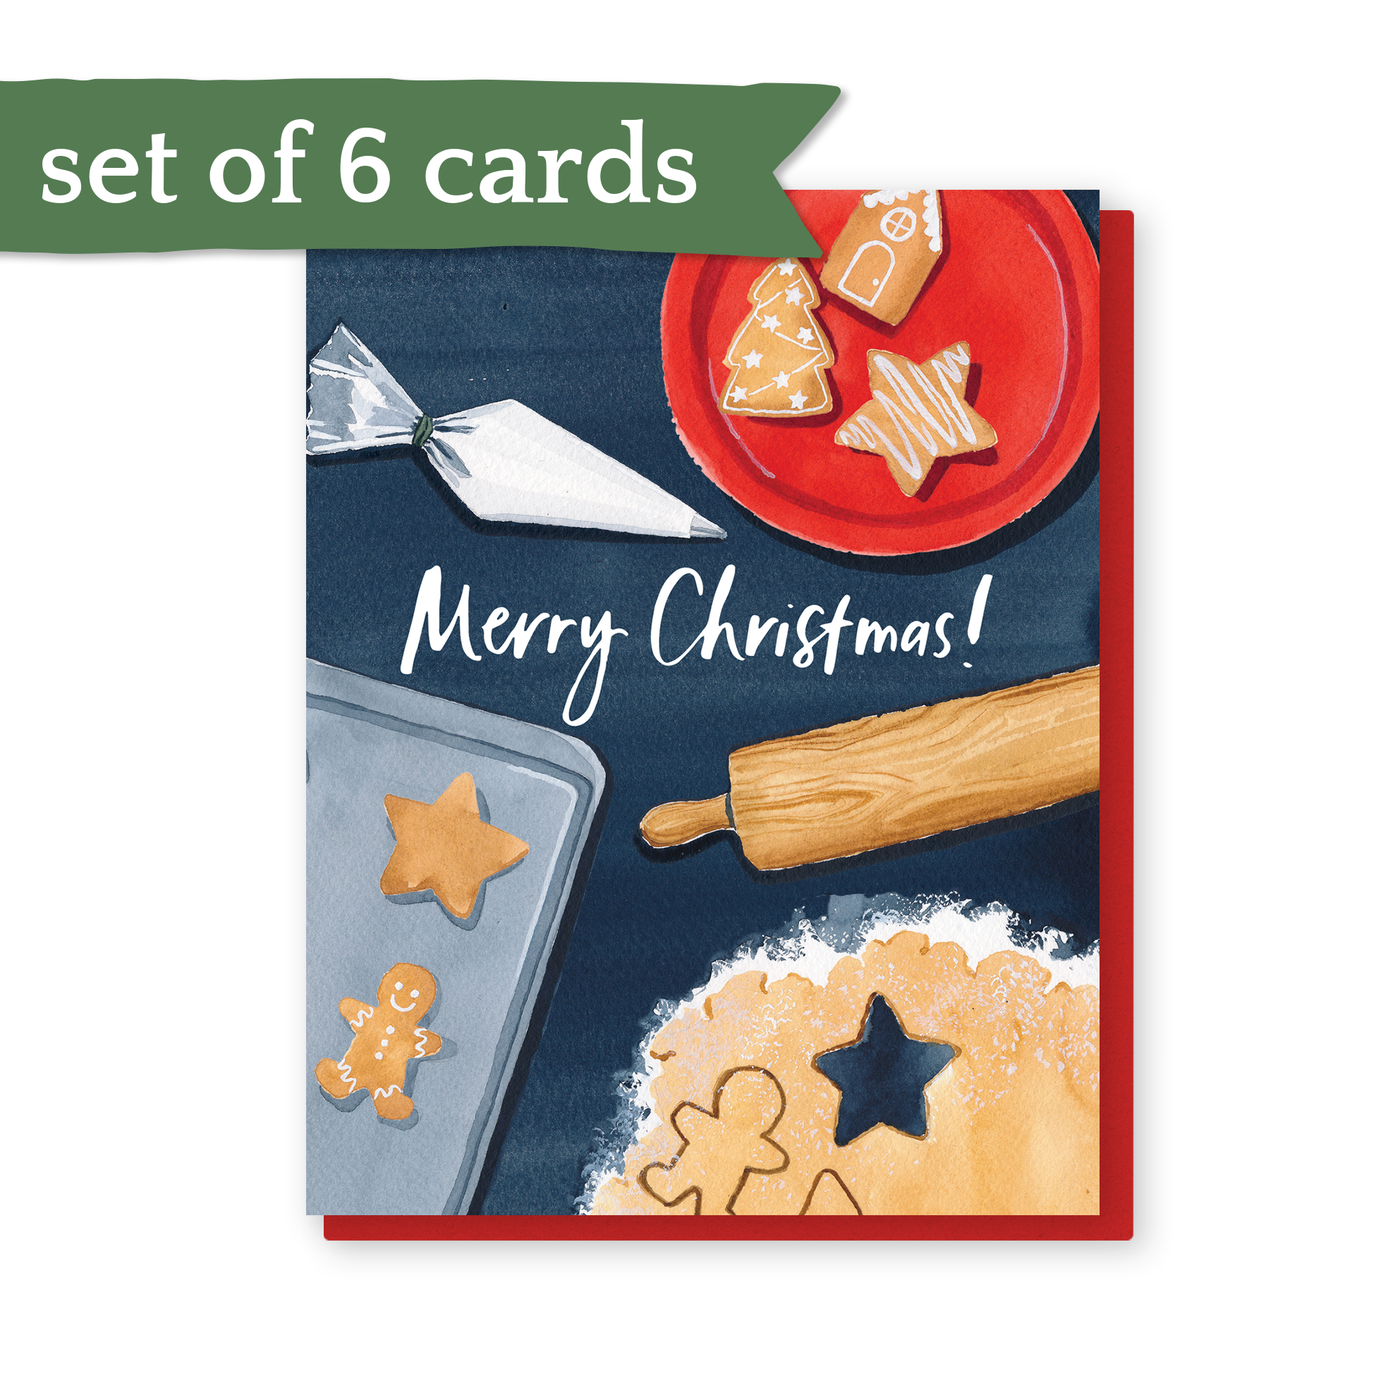 set of 6 gingerbread cookies Christmas cards